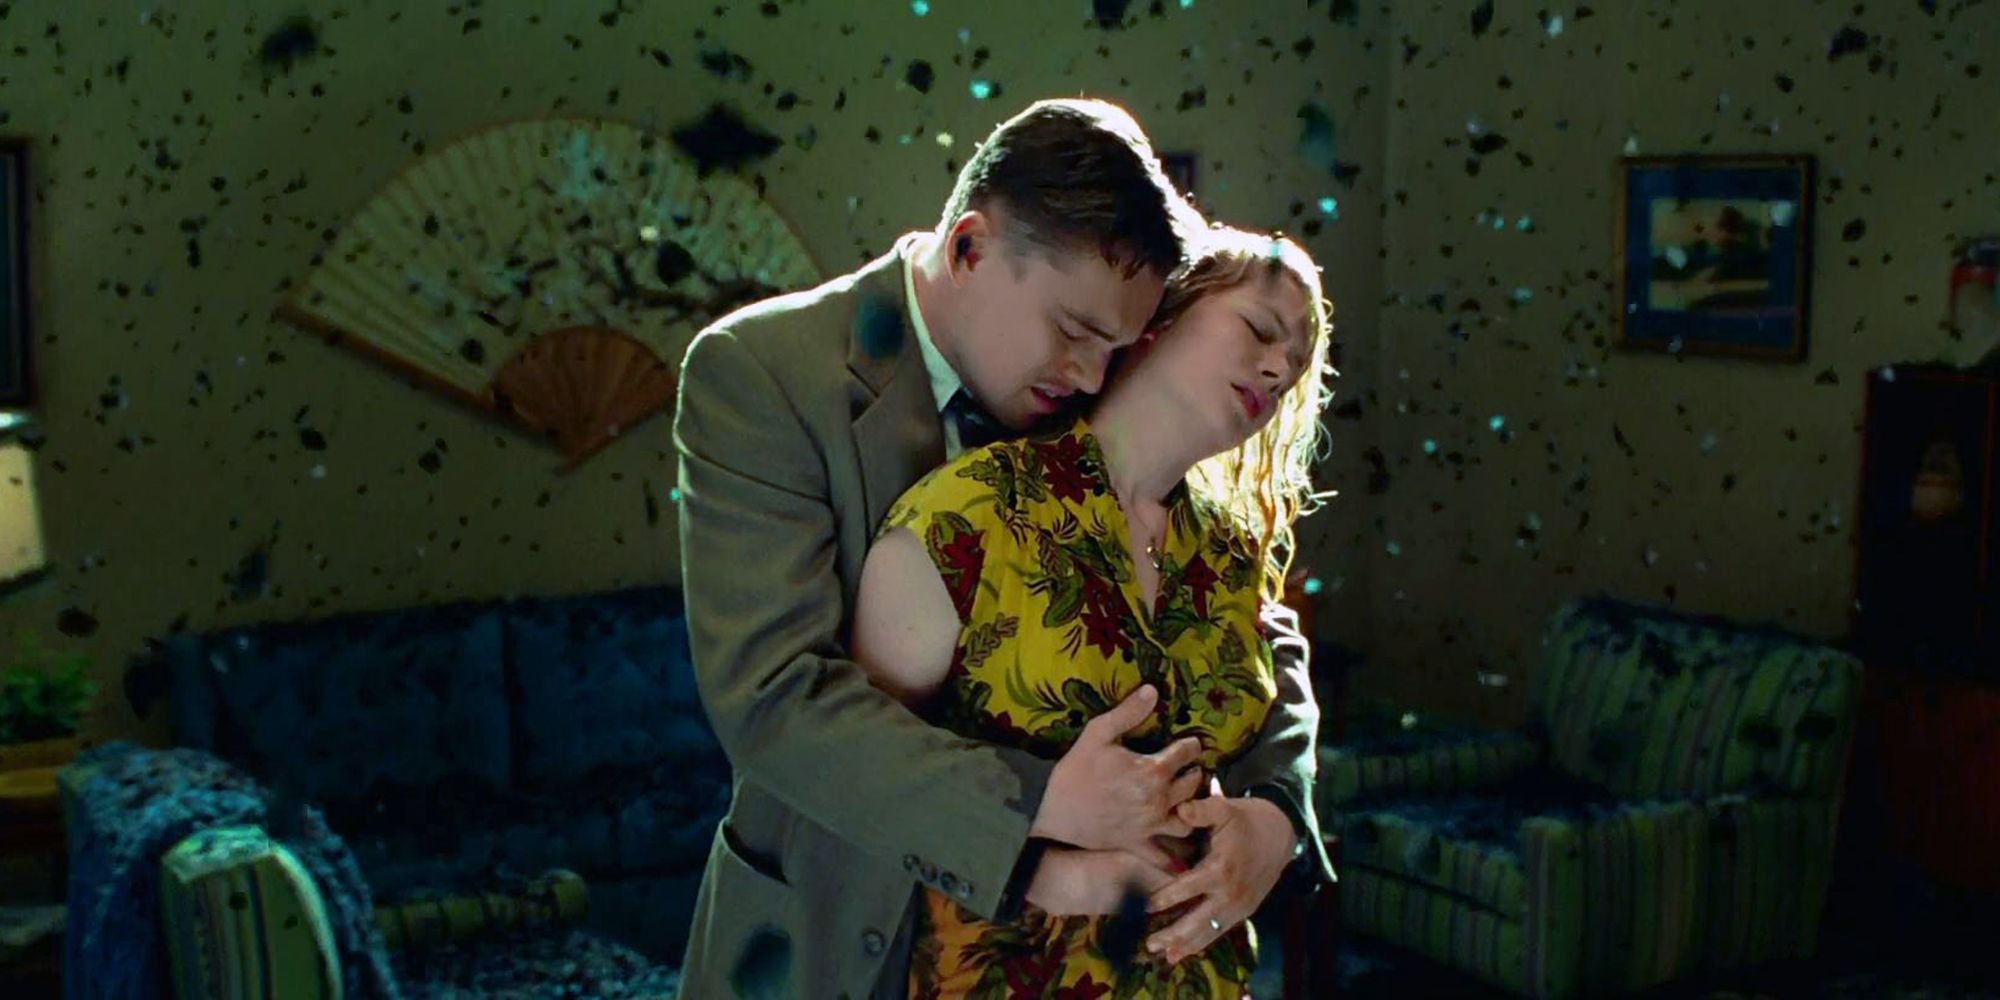 'Shutter Island' blurs the line between what is real and what isn't